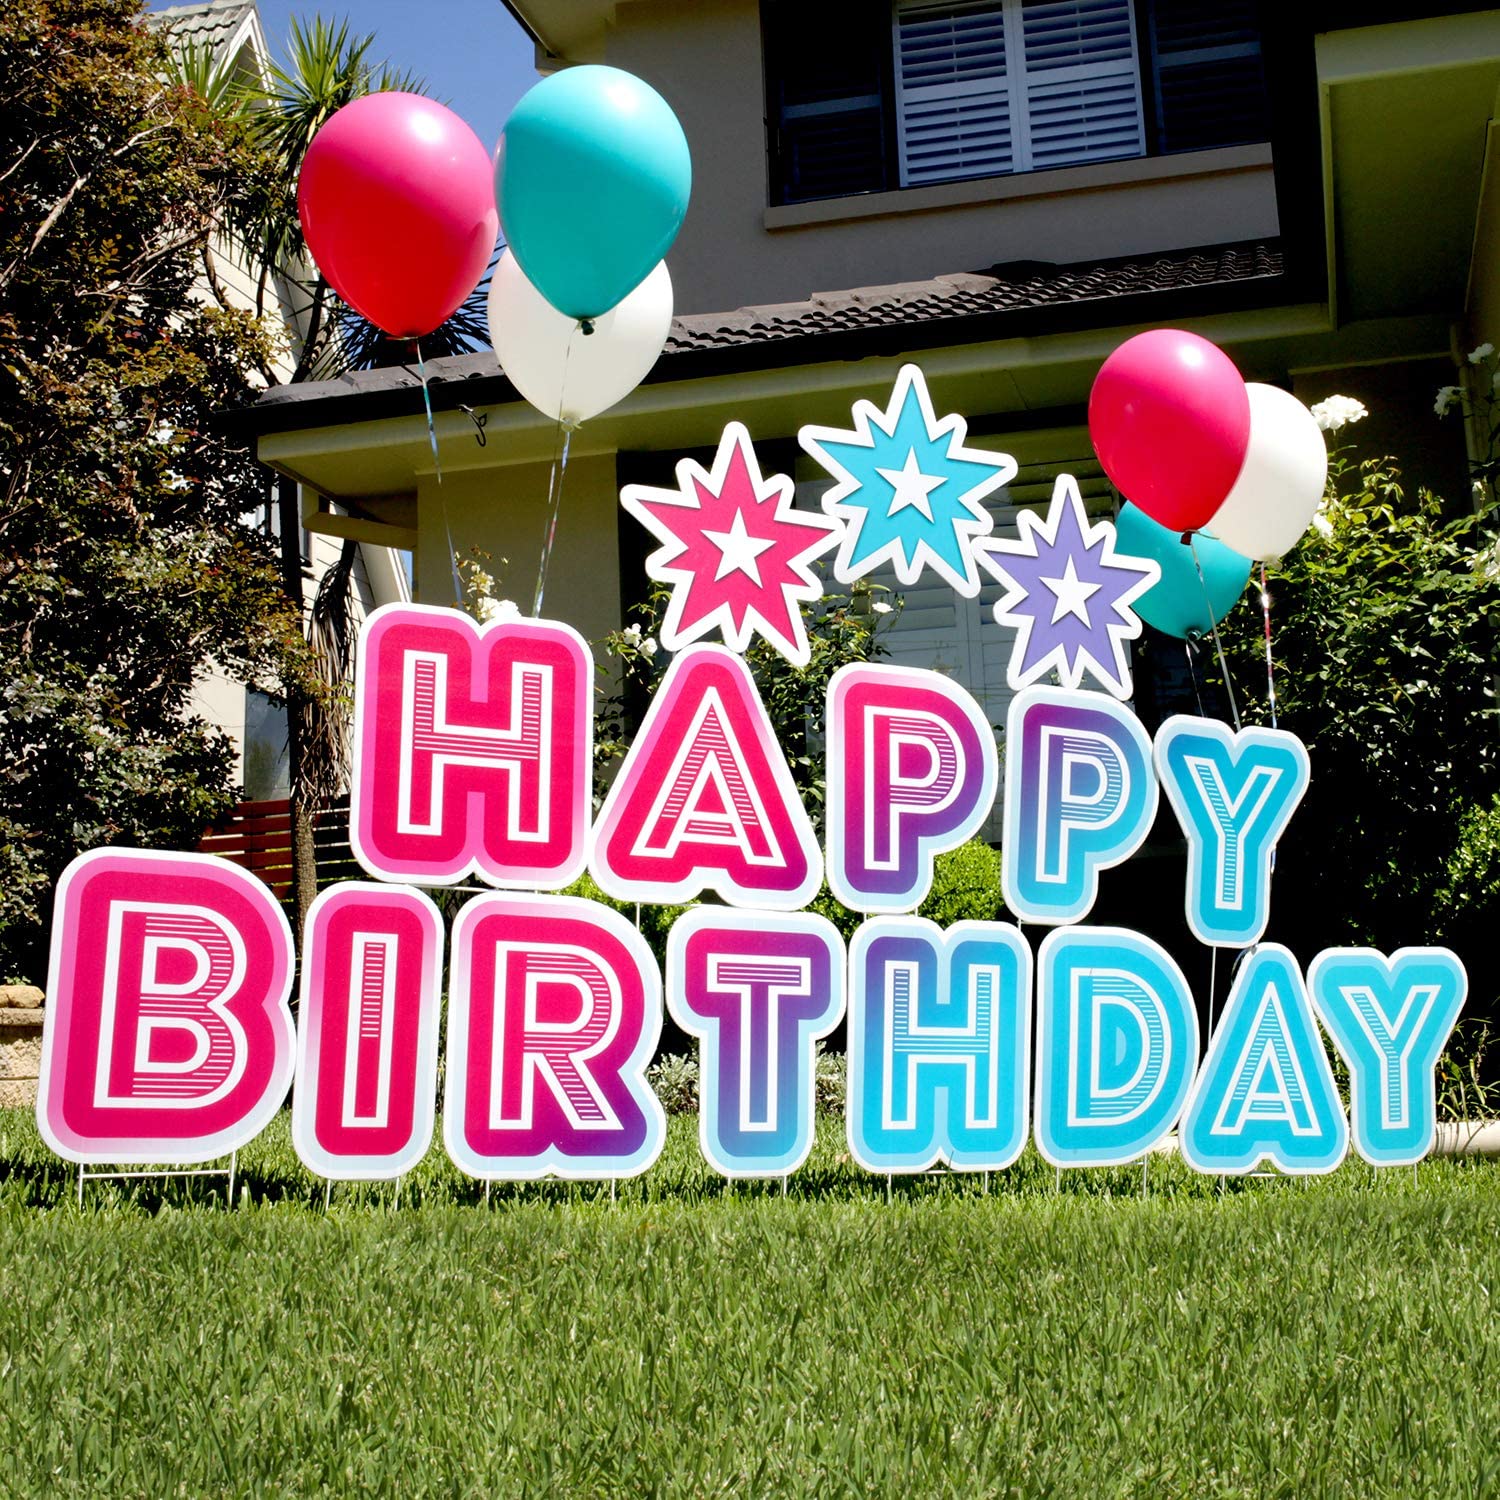 Happy Birthday Yard Sign Set 3-in-1 Stacking Birthday Lawn Letters Ha Bonolo Instola Reusable Reusable Happy Birthday Yard Signs with Stakes and Stars (46 x 160 inches) Setšoantšo se Featured